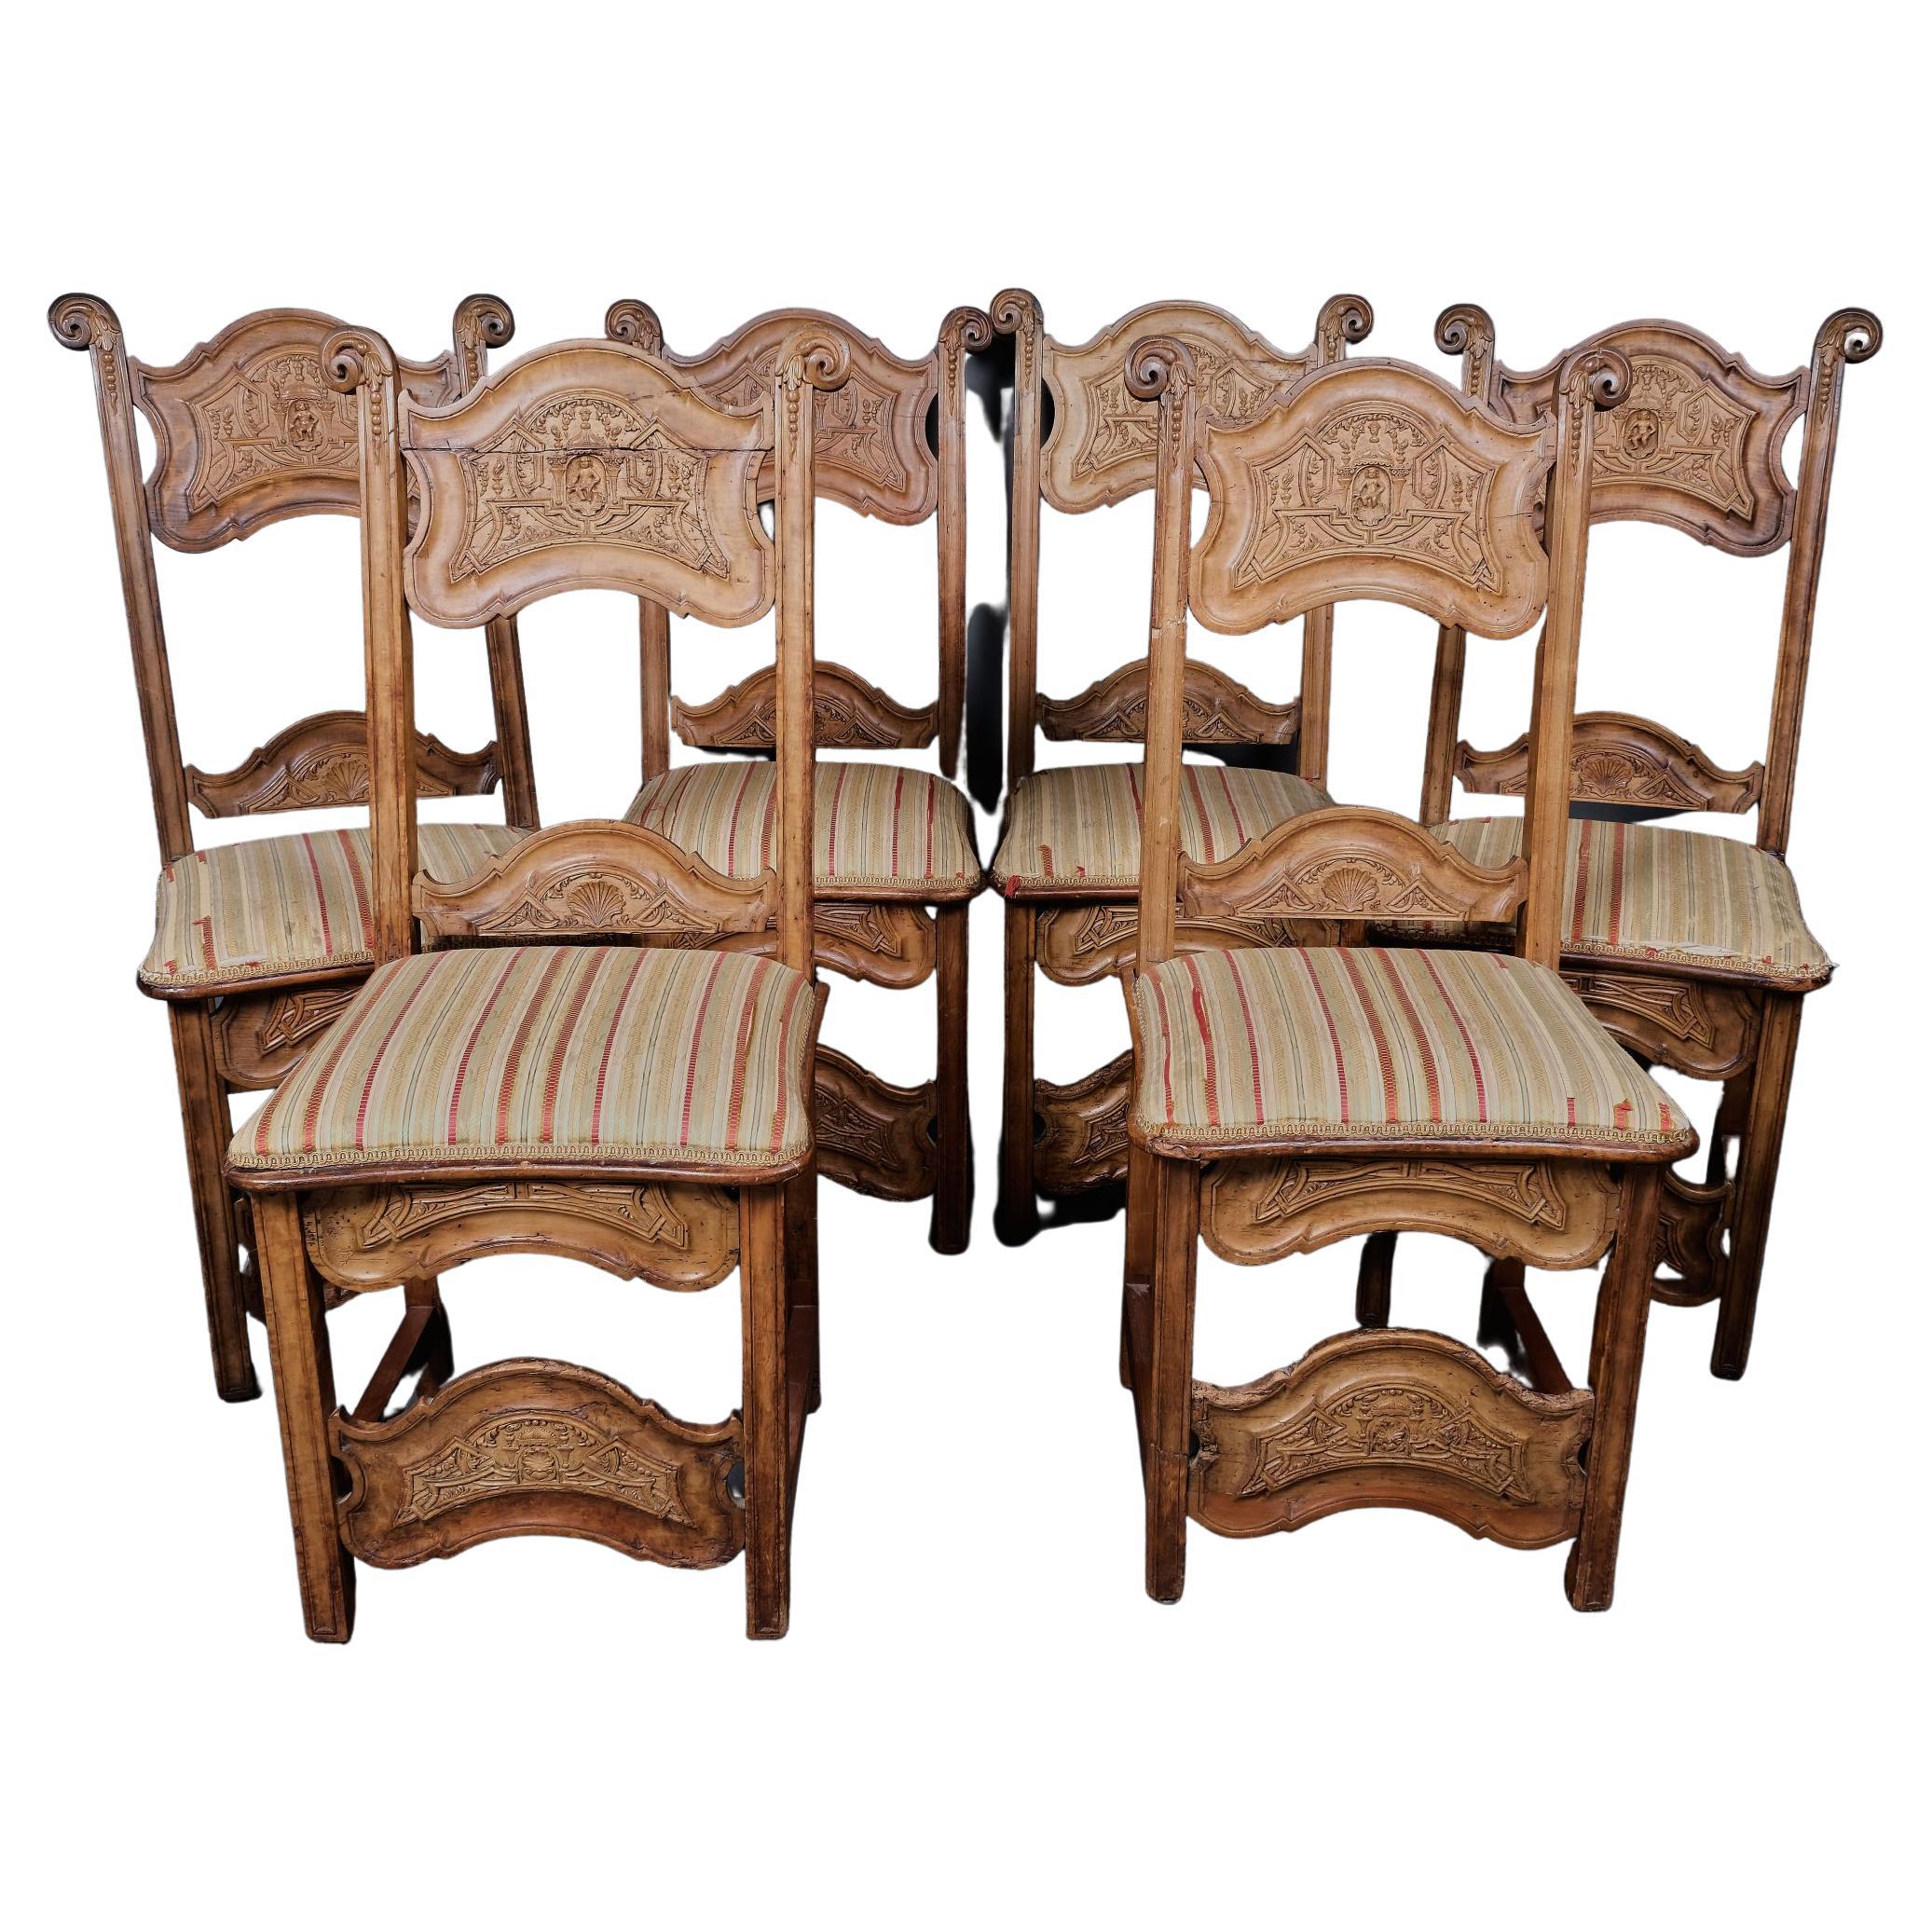 Rare Suite of Six Chairs, Prob. Lorraine, 18th Century For Sale